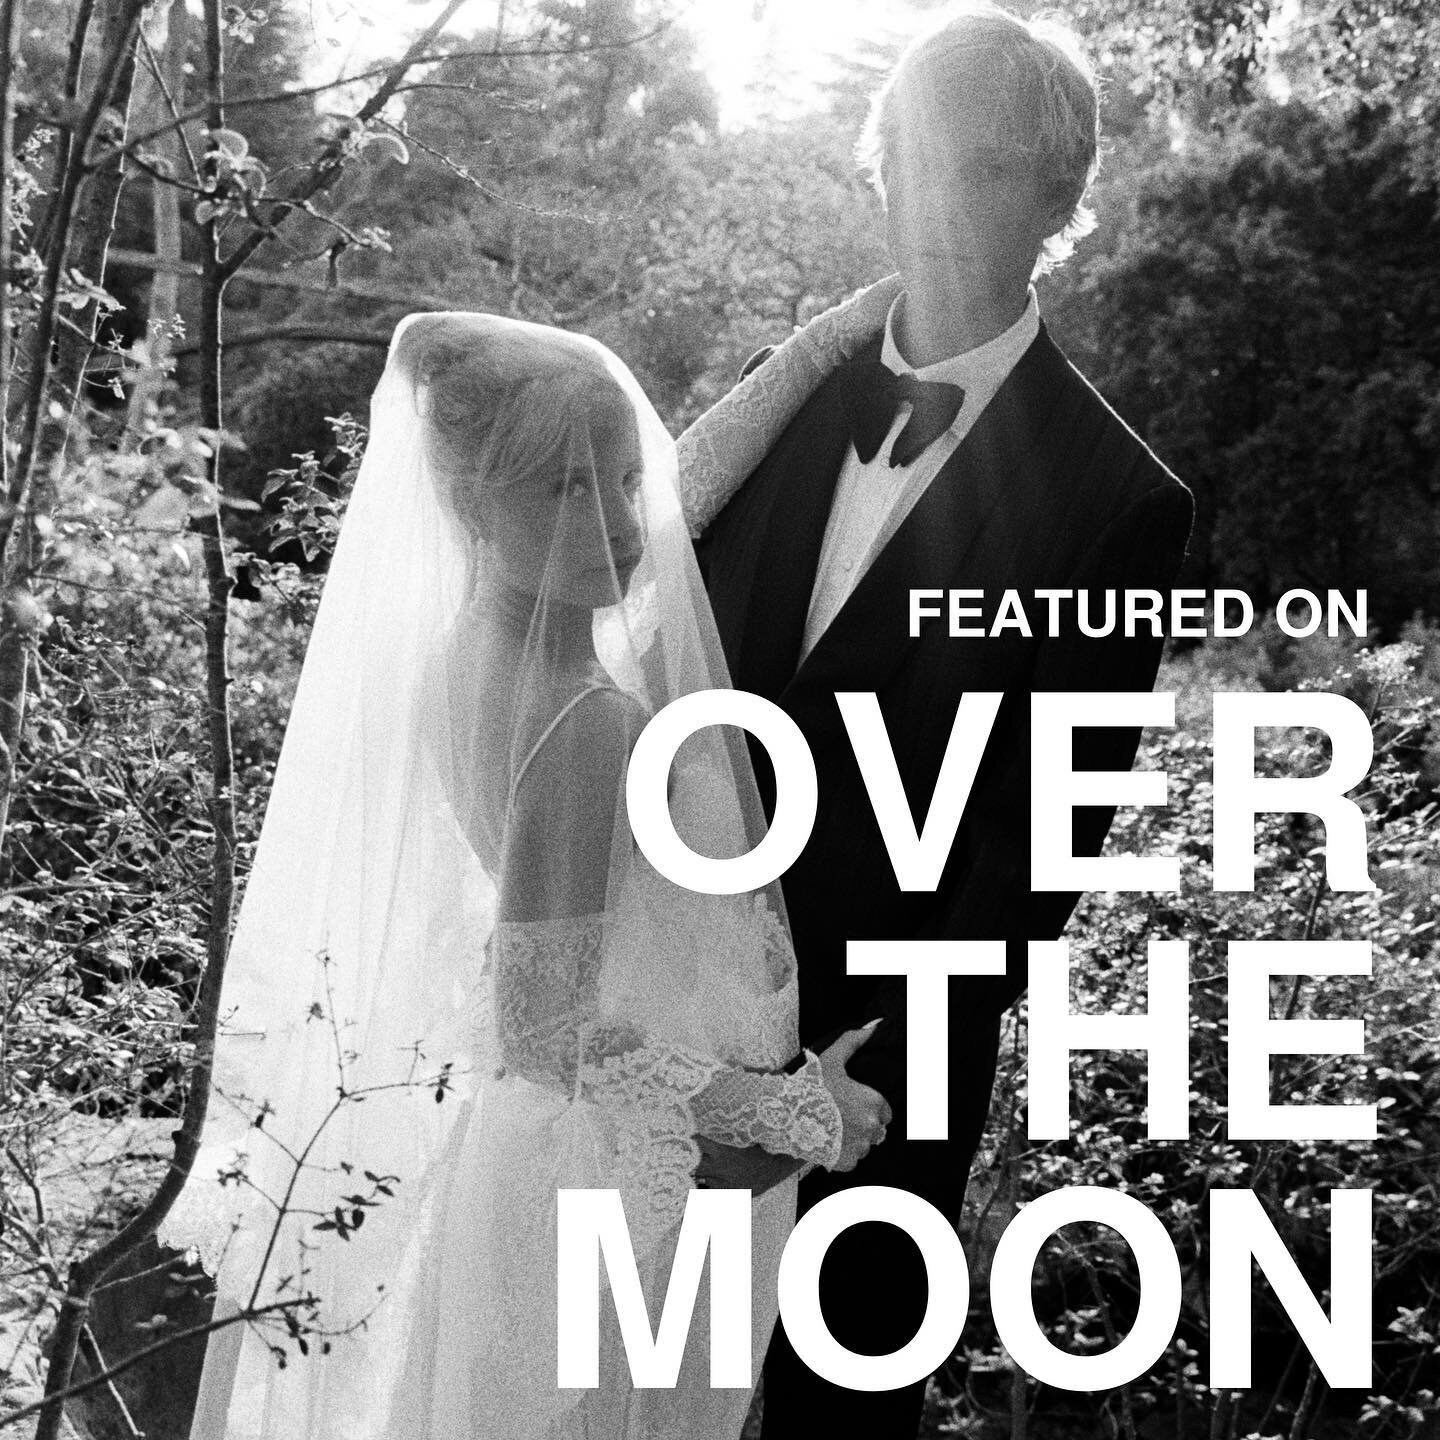 Featured on @overthemoon and I&rsquo;m feeling so happy and proud 🤍

This wedding was hard to keep for ourselves, and I&rsquo;m so glad to be able to share with you some precious moments of connection, blessing, joy and love of this very special day